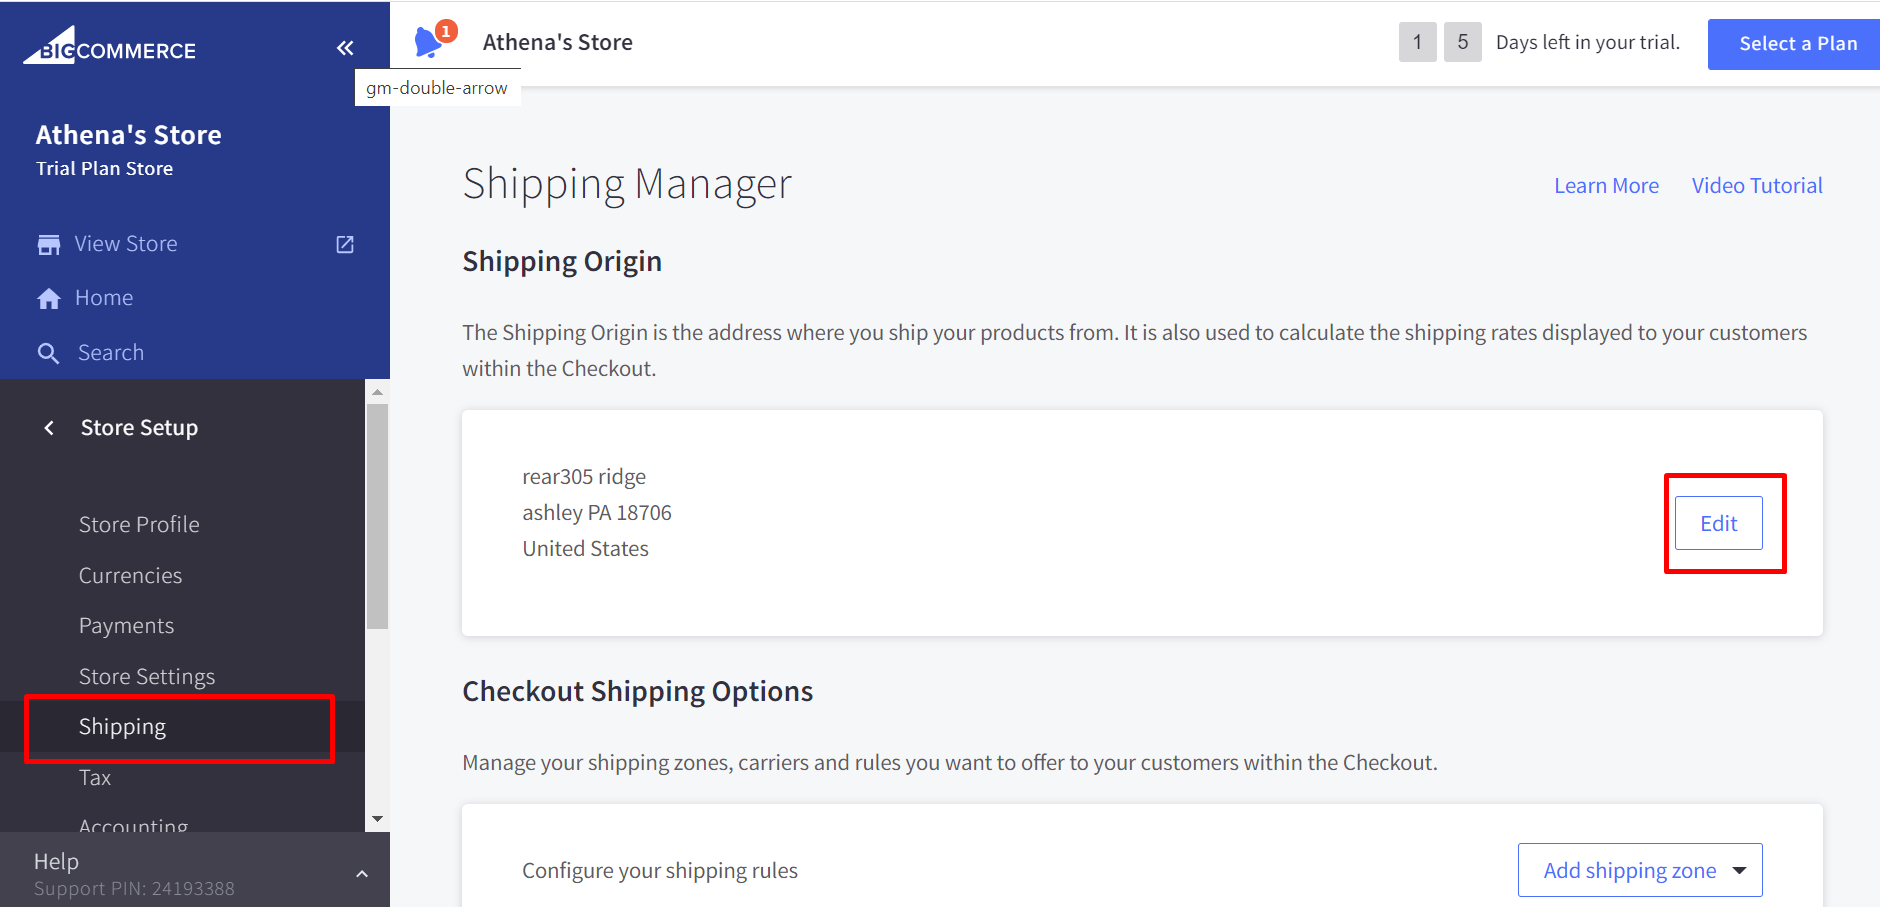 Go to Store Setup > Shipping